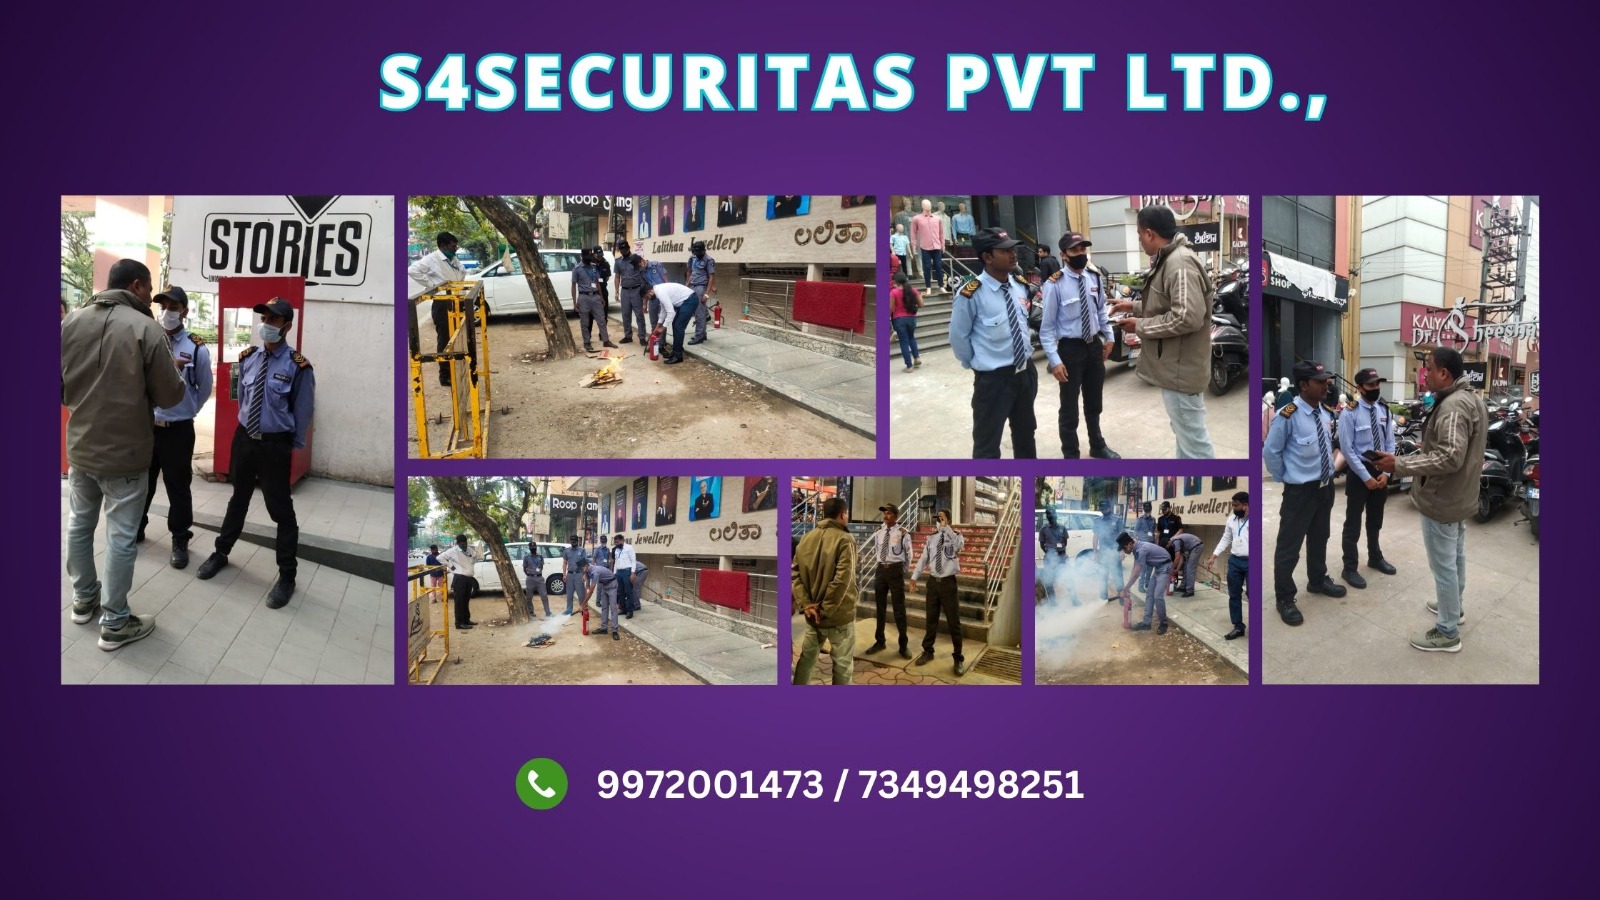 S4SECURITAS PVT LTD - Latest update - Warehouse Security Guard Services Near Electronic City